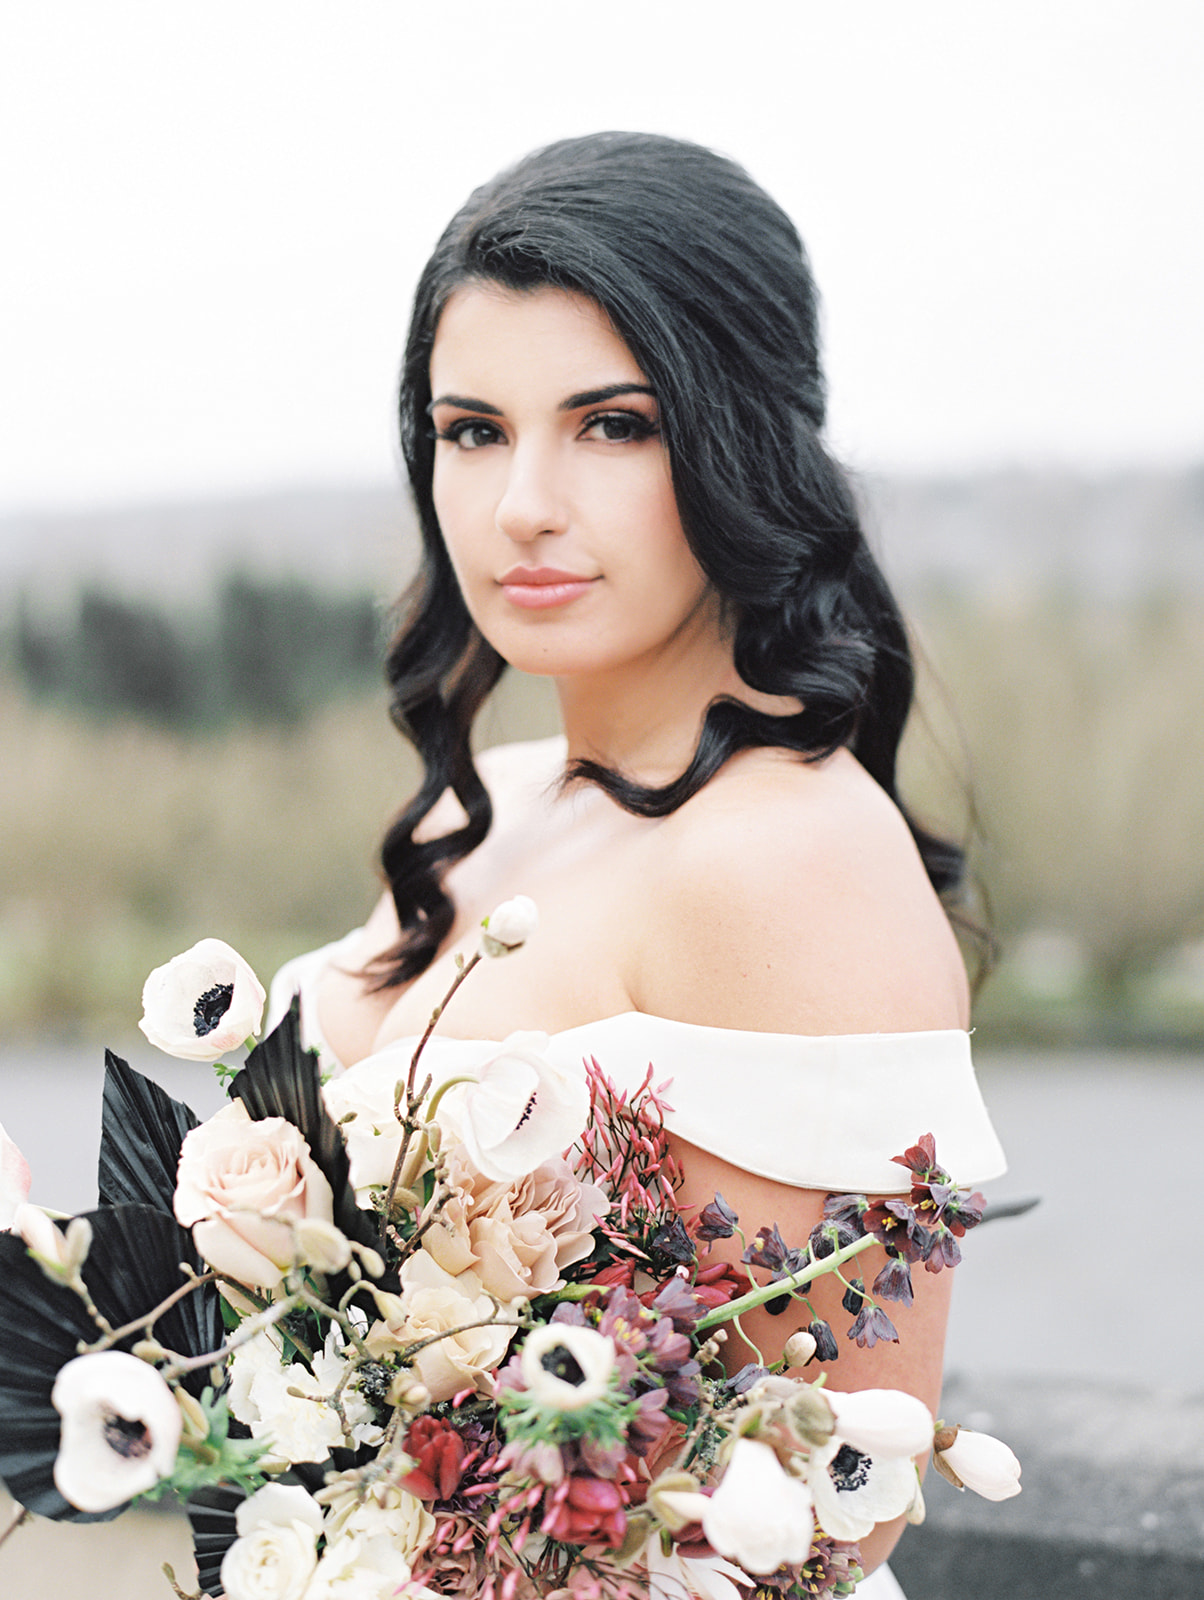 A bride holding a bouquet with anenomes, spring tulips and fritillaria, blooming branches, roses, and black palm spears